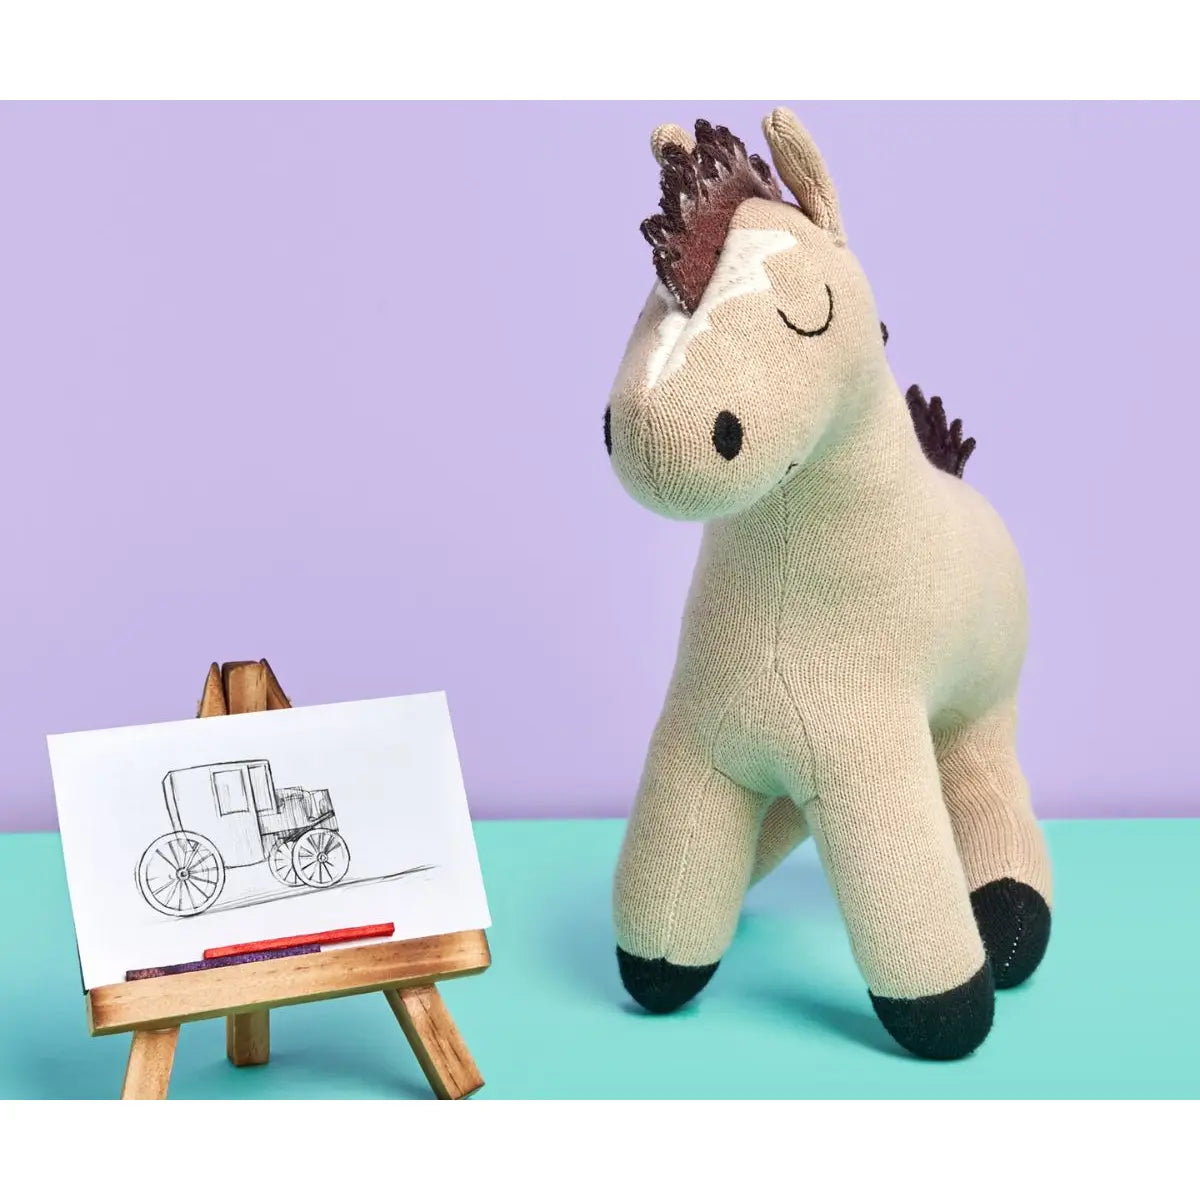 Knitted Horse Plush Toy